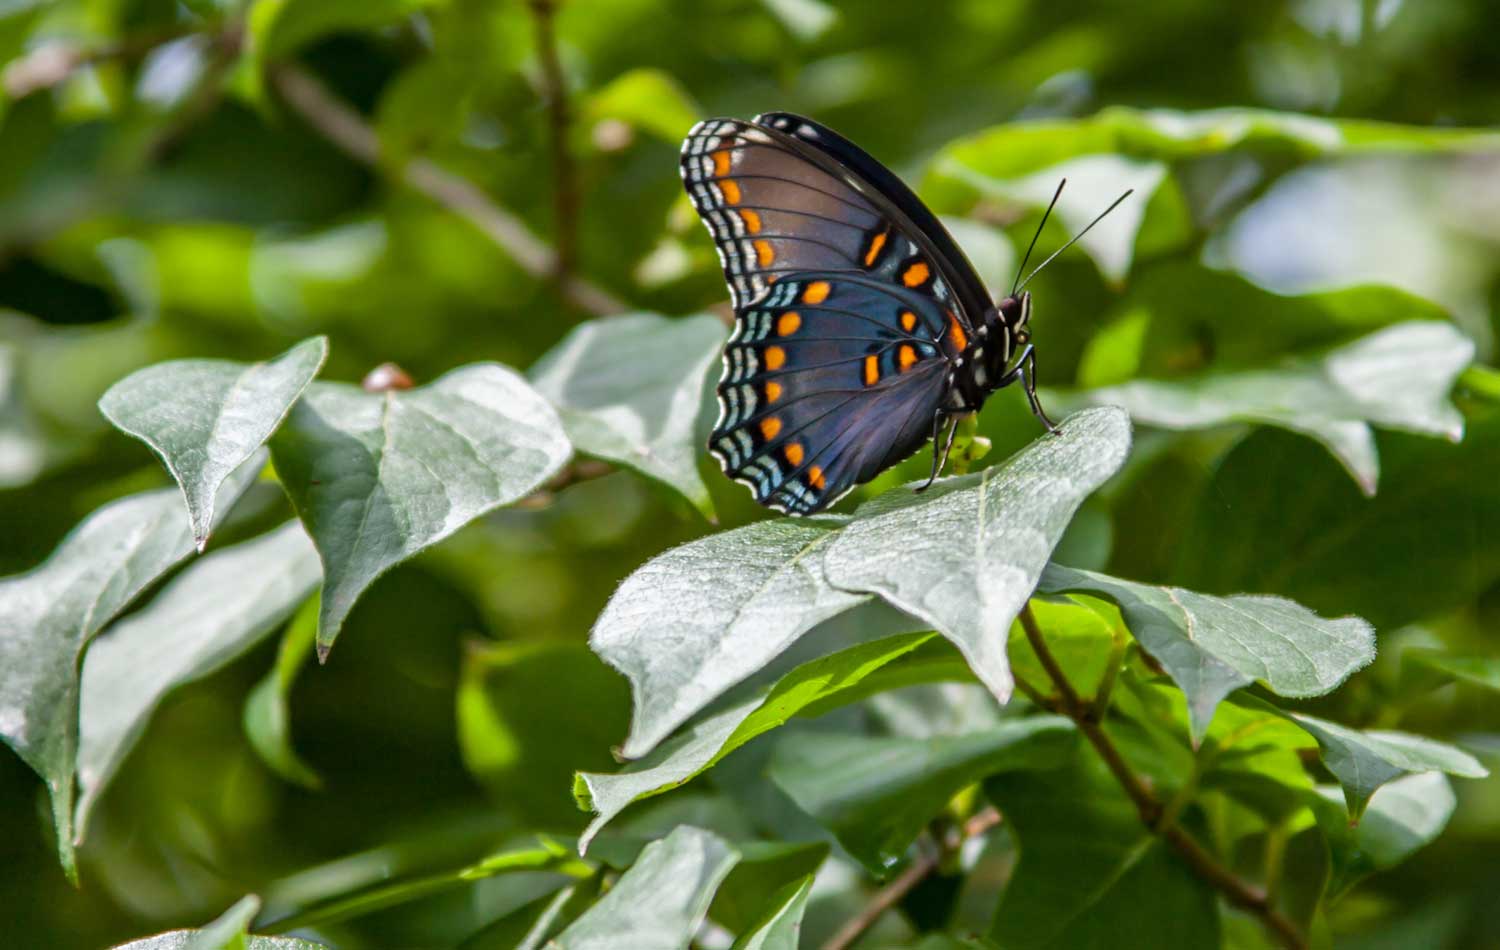 A red-spotted admiral butterfly on a leaf.